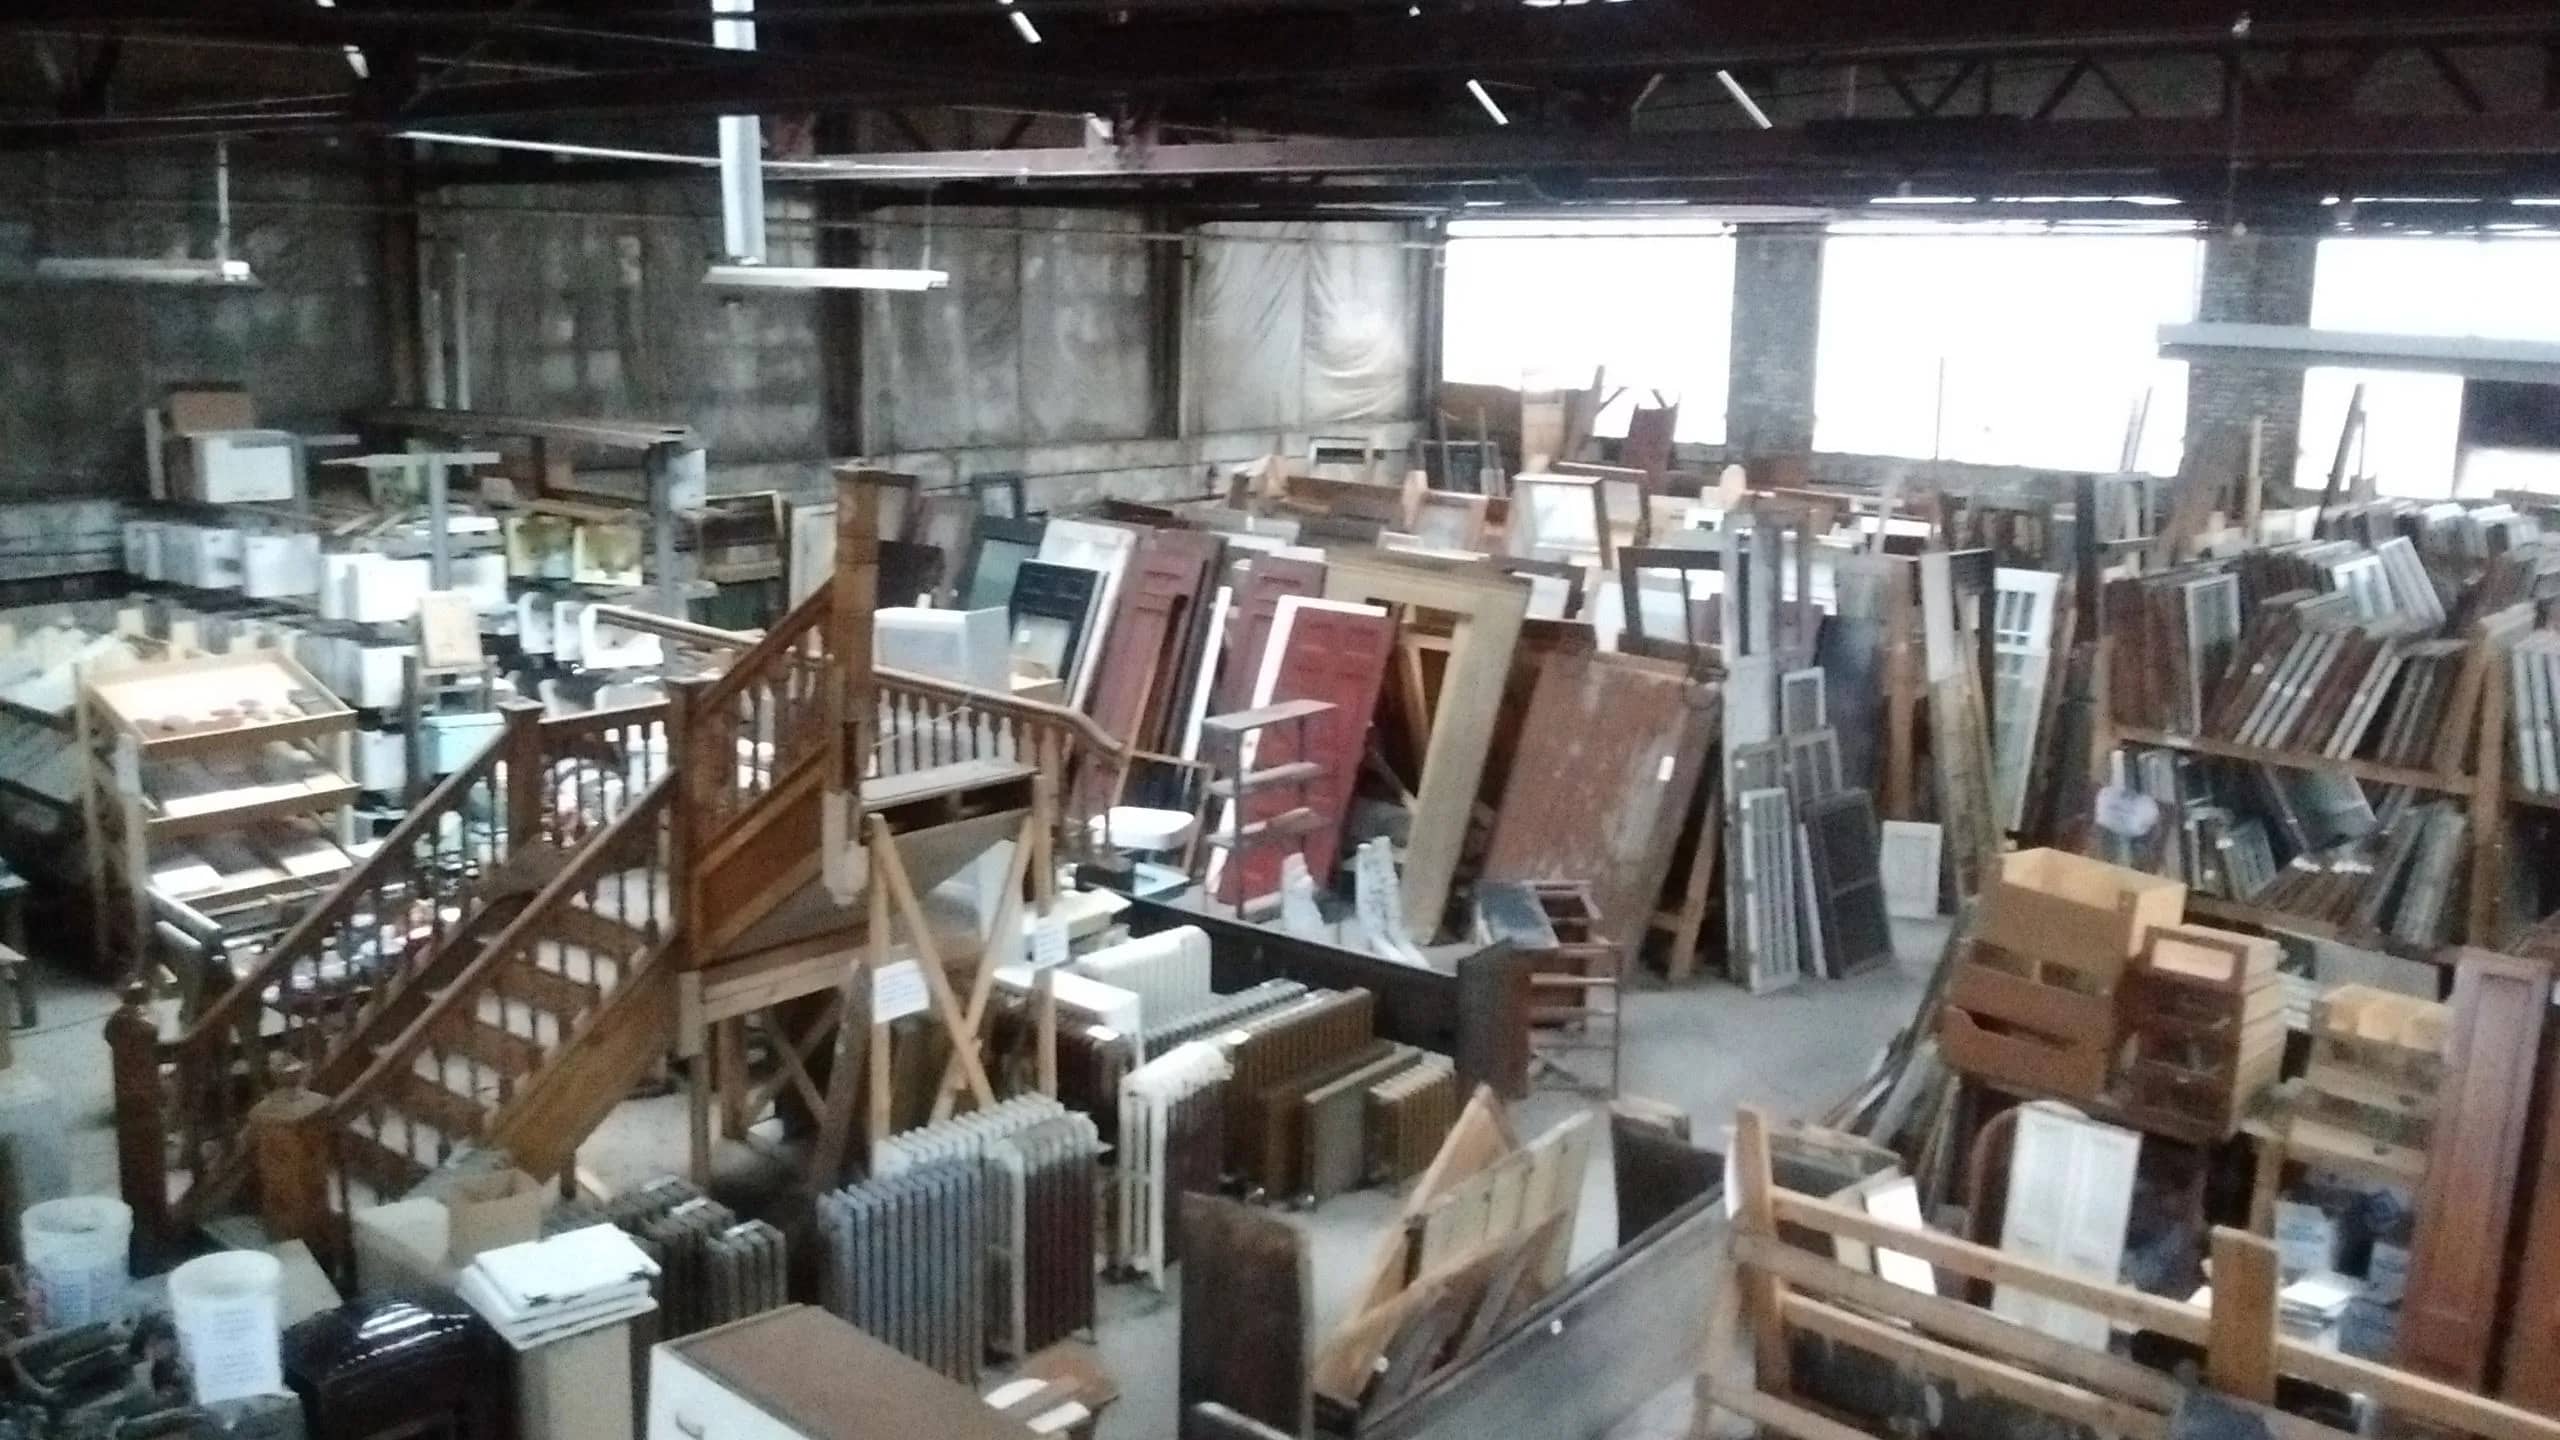 Operations of Architectural Salvage